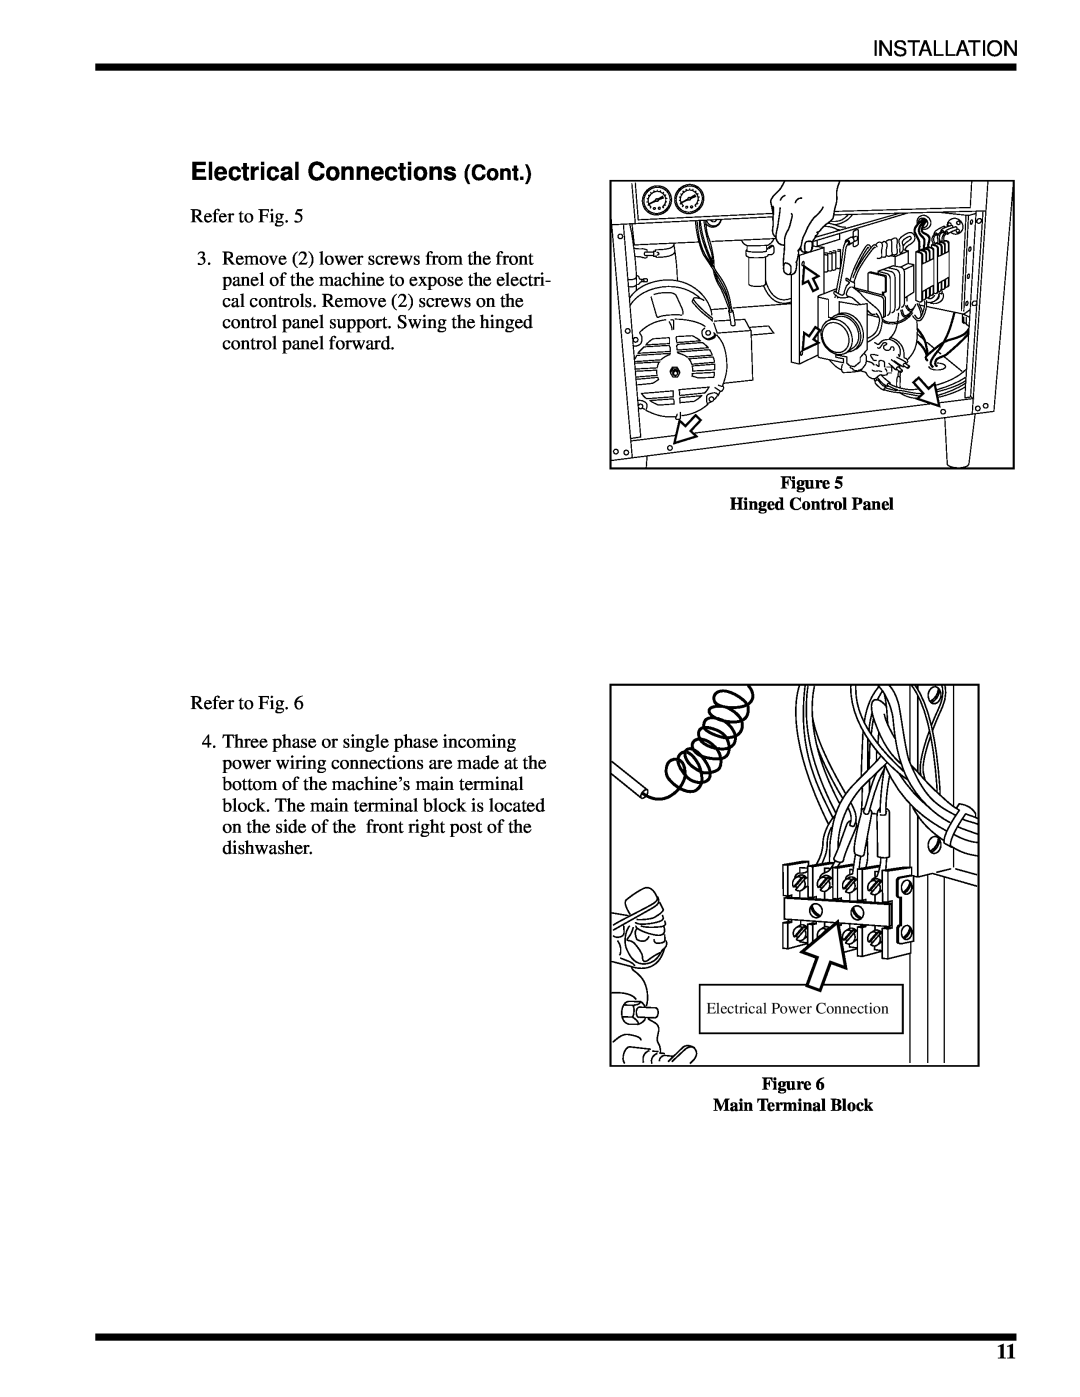 Moyer Diebel MH-6LM3, MH-6NM3, MH-60M3 technical manual Electrical Connections Cont, Installation 